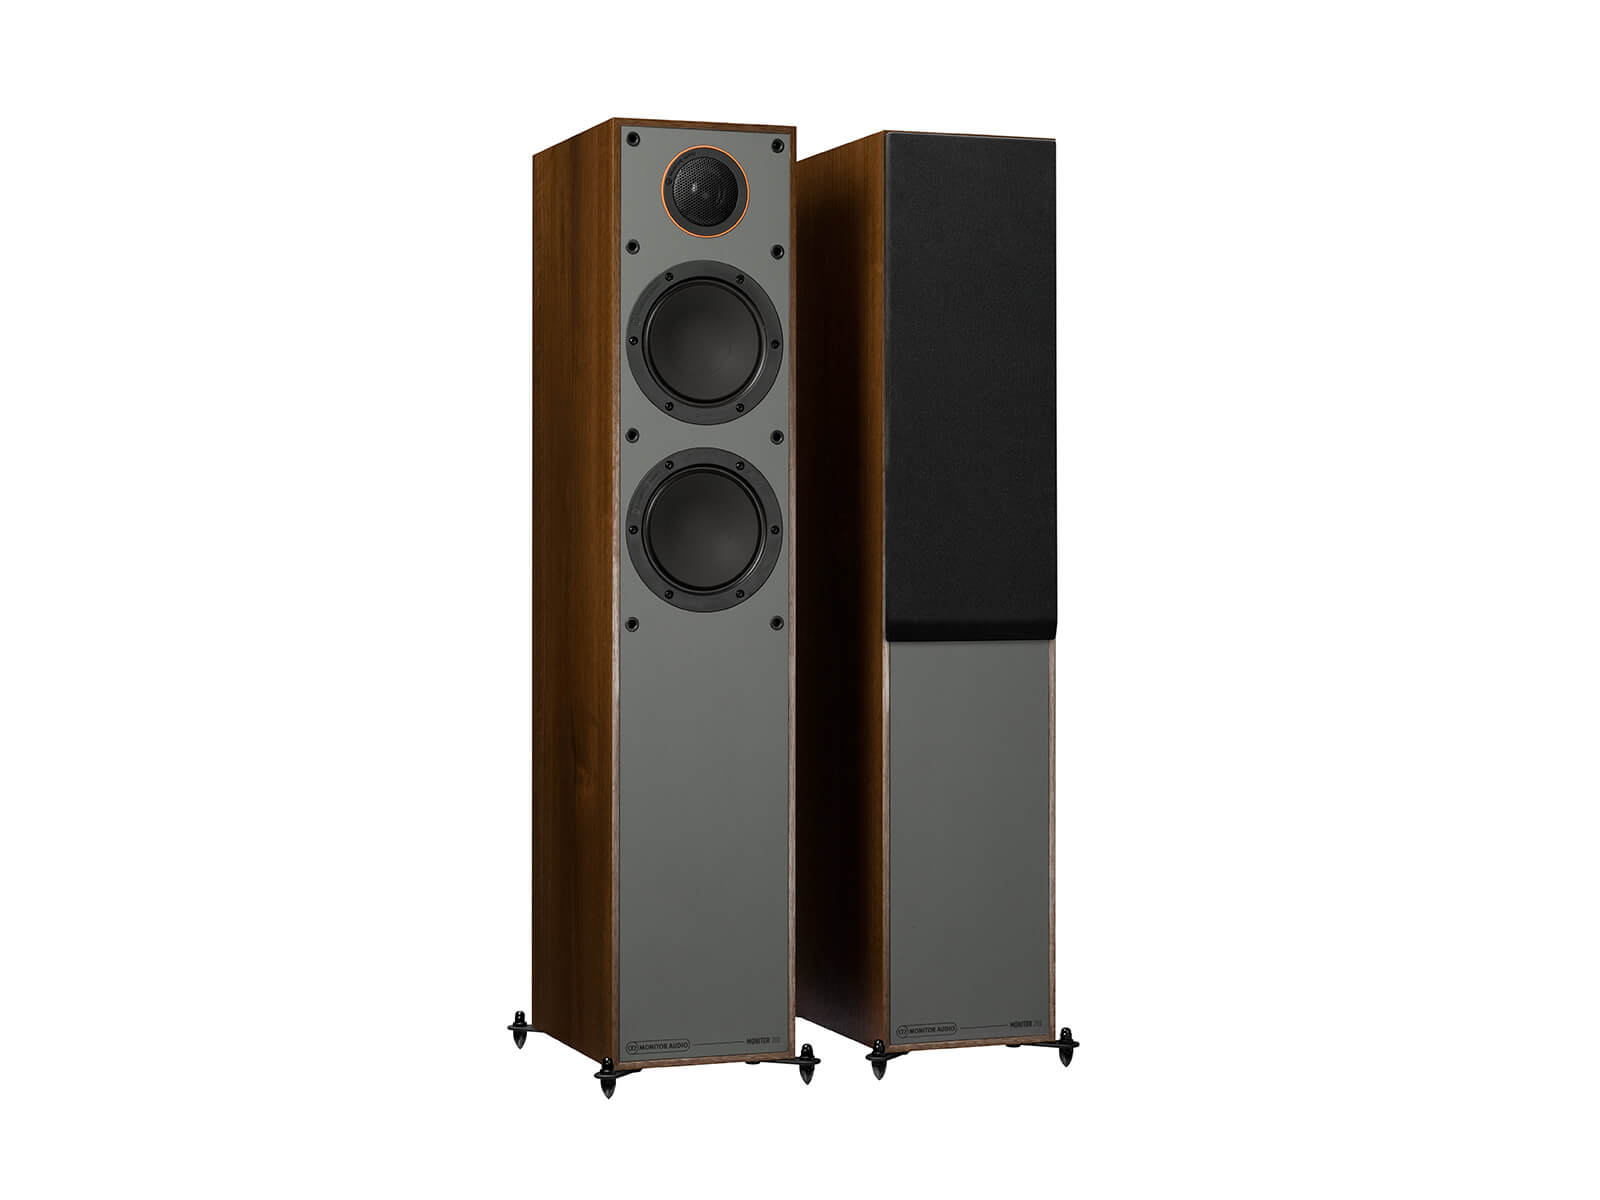 Monitor 200, floorstanding speakers, with and without grille in a walnut vinyl finish.